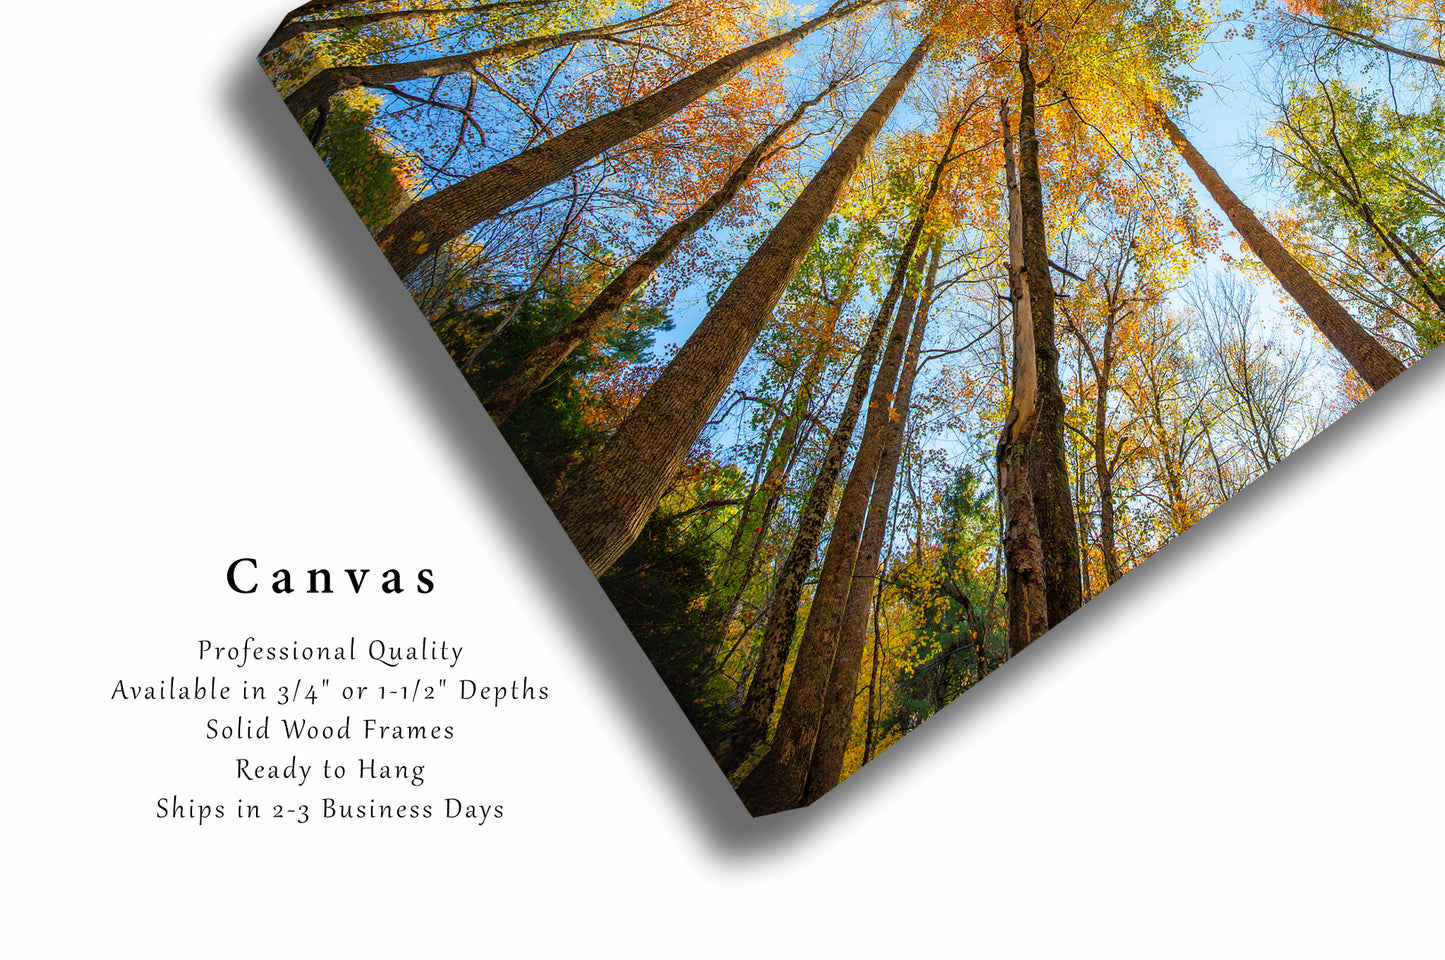 Forest Canvas Wall Art - Gallery Wrap of Looking Up in Trees on Autumn Day in Great Smoky Mountains Tennessee - Photography Artwork Decor